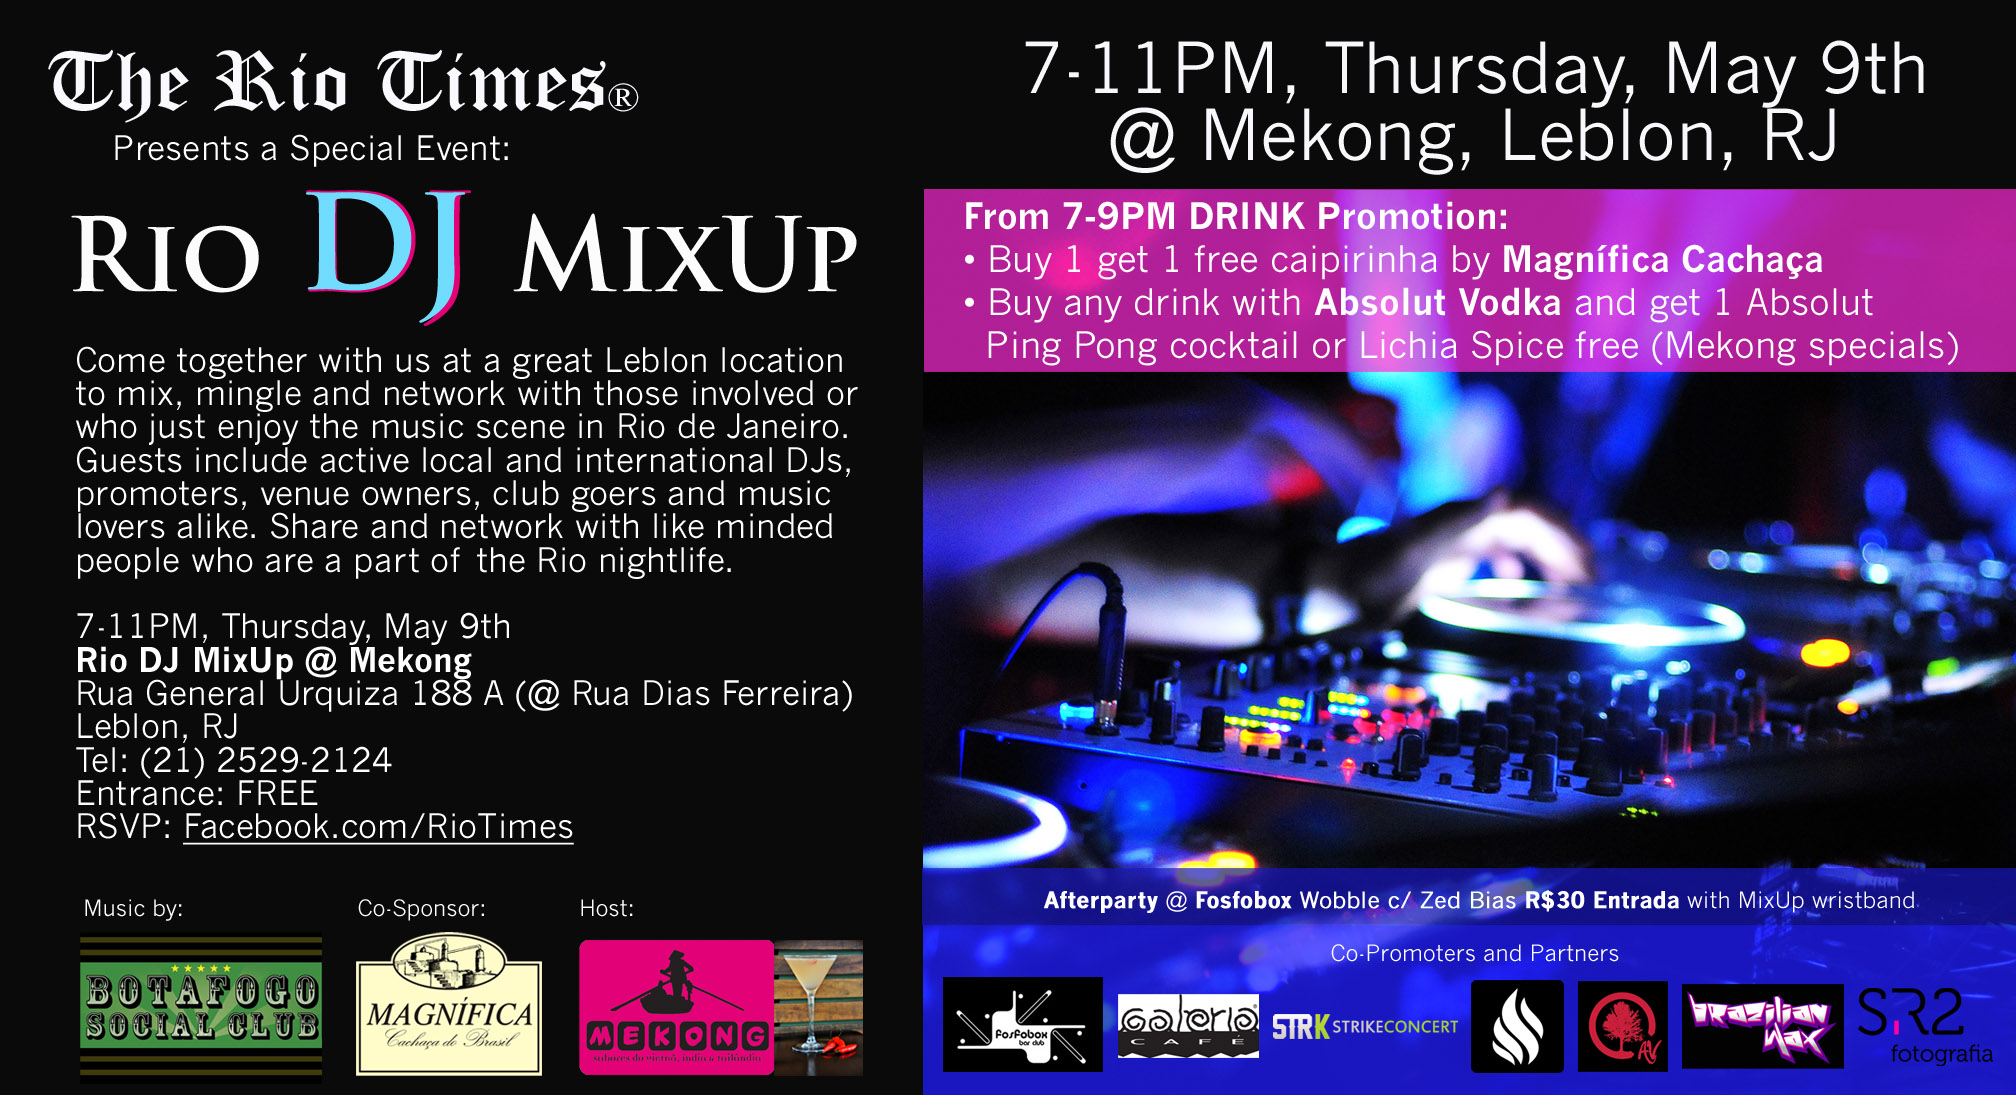 Thursday, May 9th, 2013 Nightlife Guide